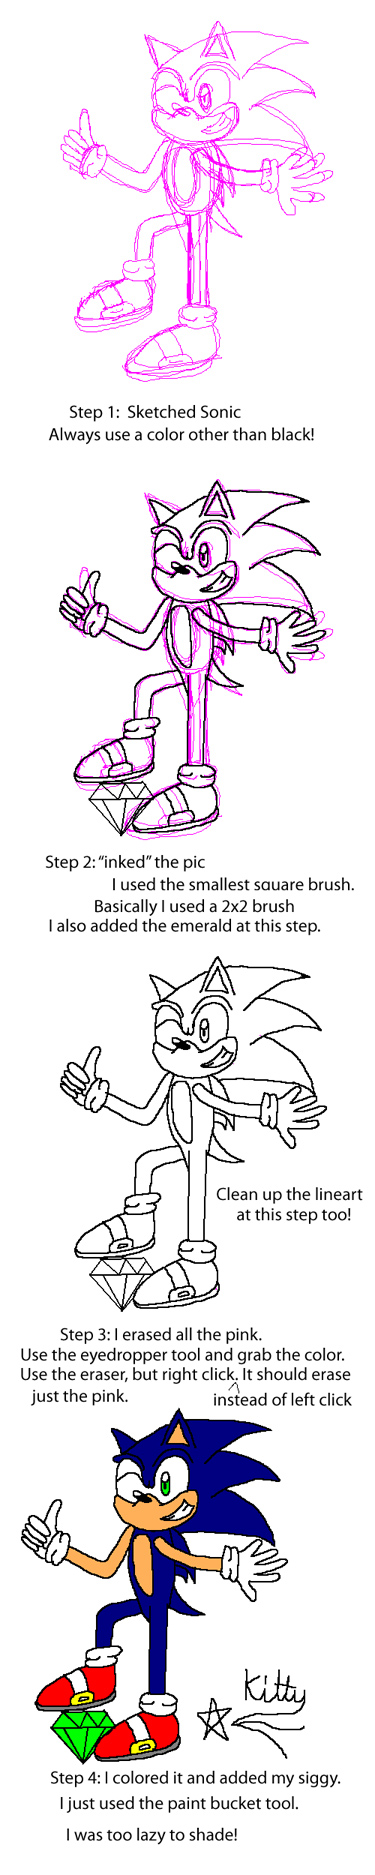 How I made my Sonic on Paint by kittyshootingstar